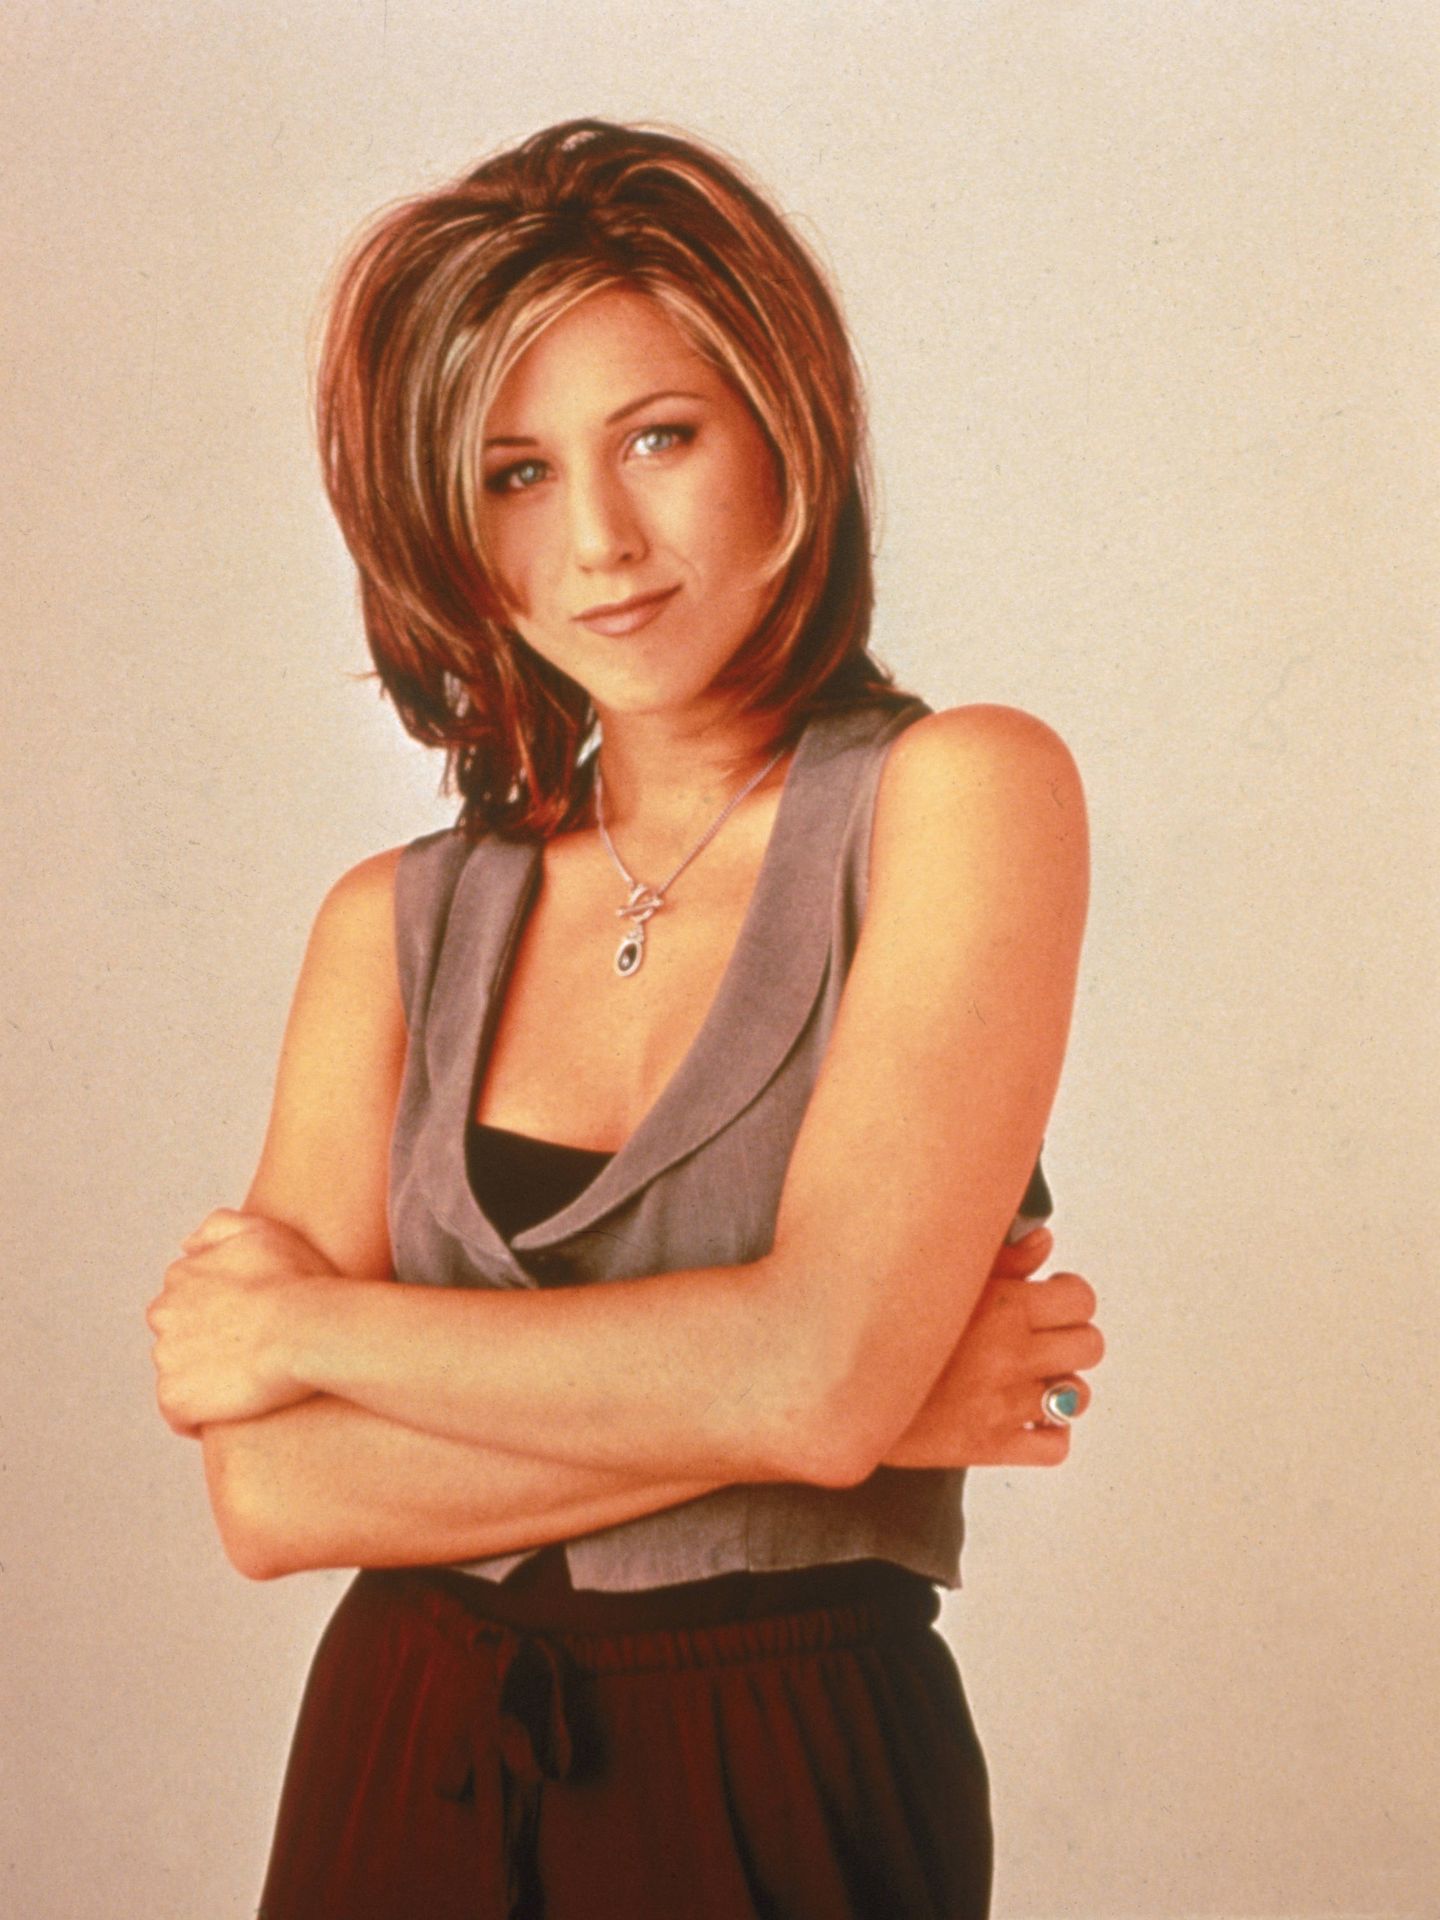 Jennifer Aniston in a photo shoot for 'Friends' in 1995. (Getty)